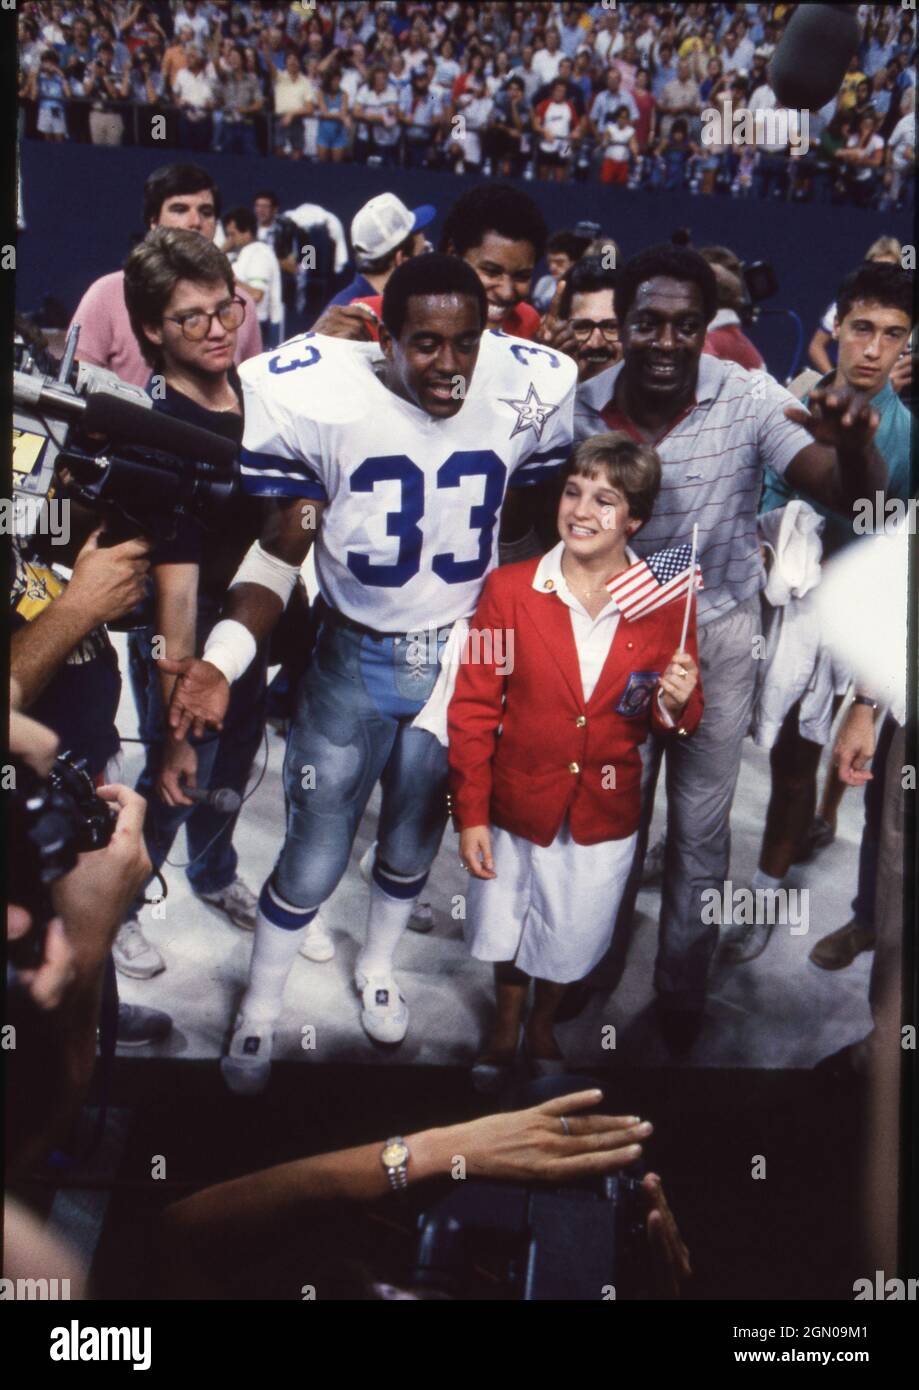 Dallas Texas USA, 1984: Olympic gold medal-winning gymnast Mary Lou Retton, honored for her Olympics heroics during the 1984 Summer Games in Los Angeles, poses with Dallas Cowboys running back Tony Dorsett at Texas Stadium before a Cowboys game. ©Bob Daemmrich Stock Photo